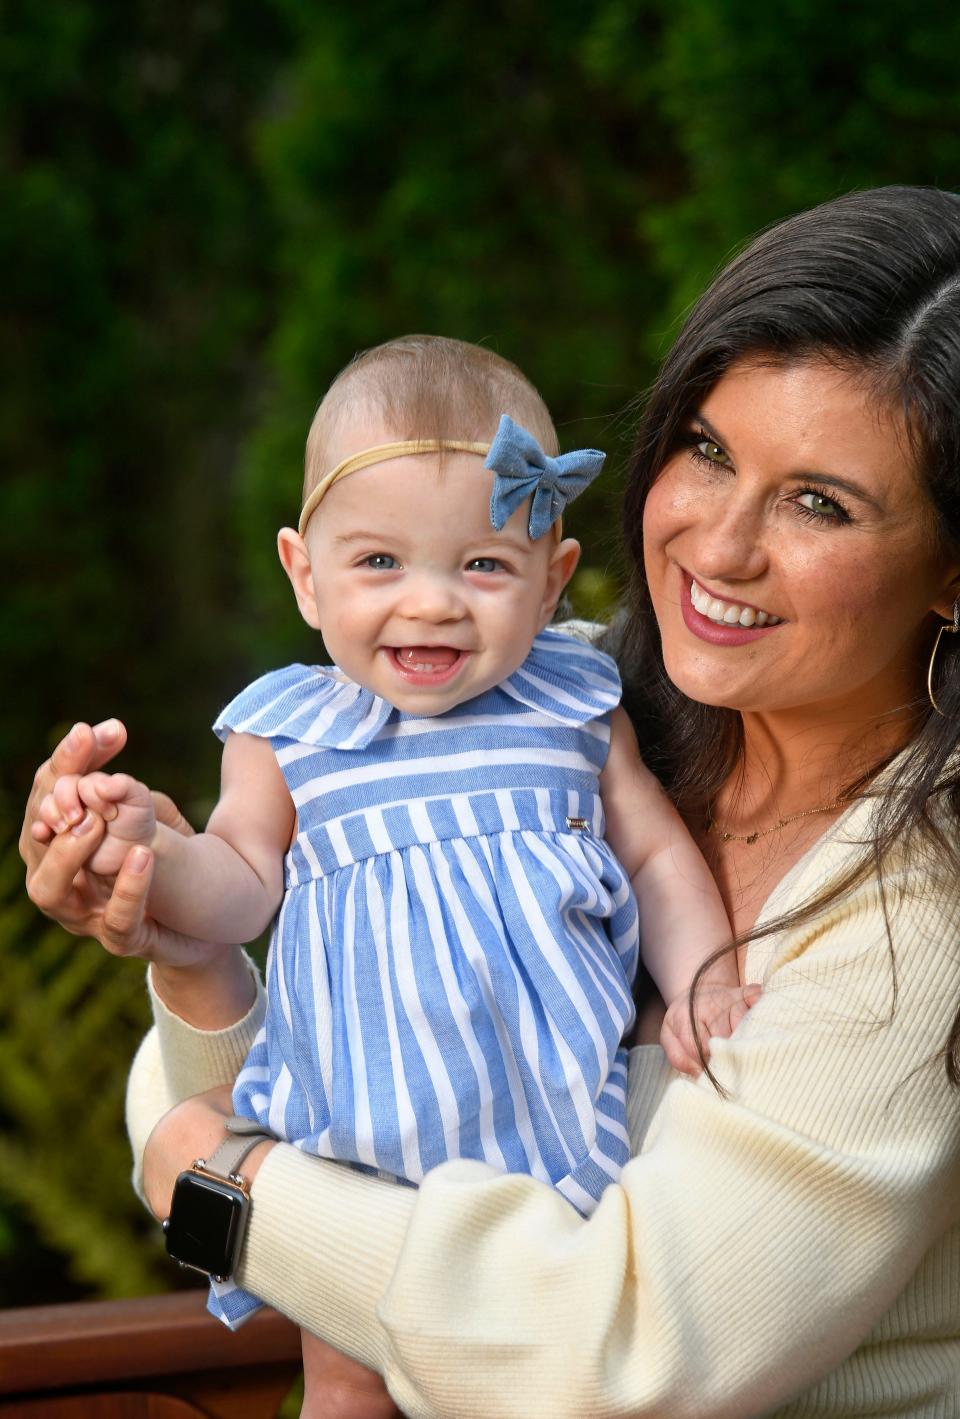 News 2 morning anchor Nikki Burdine gets a big smile from her baby, Andi, at their home in Nashville, Tenn. Thursday, April 23, 2020.